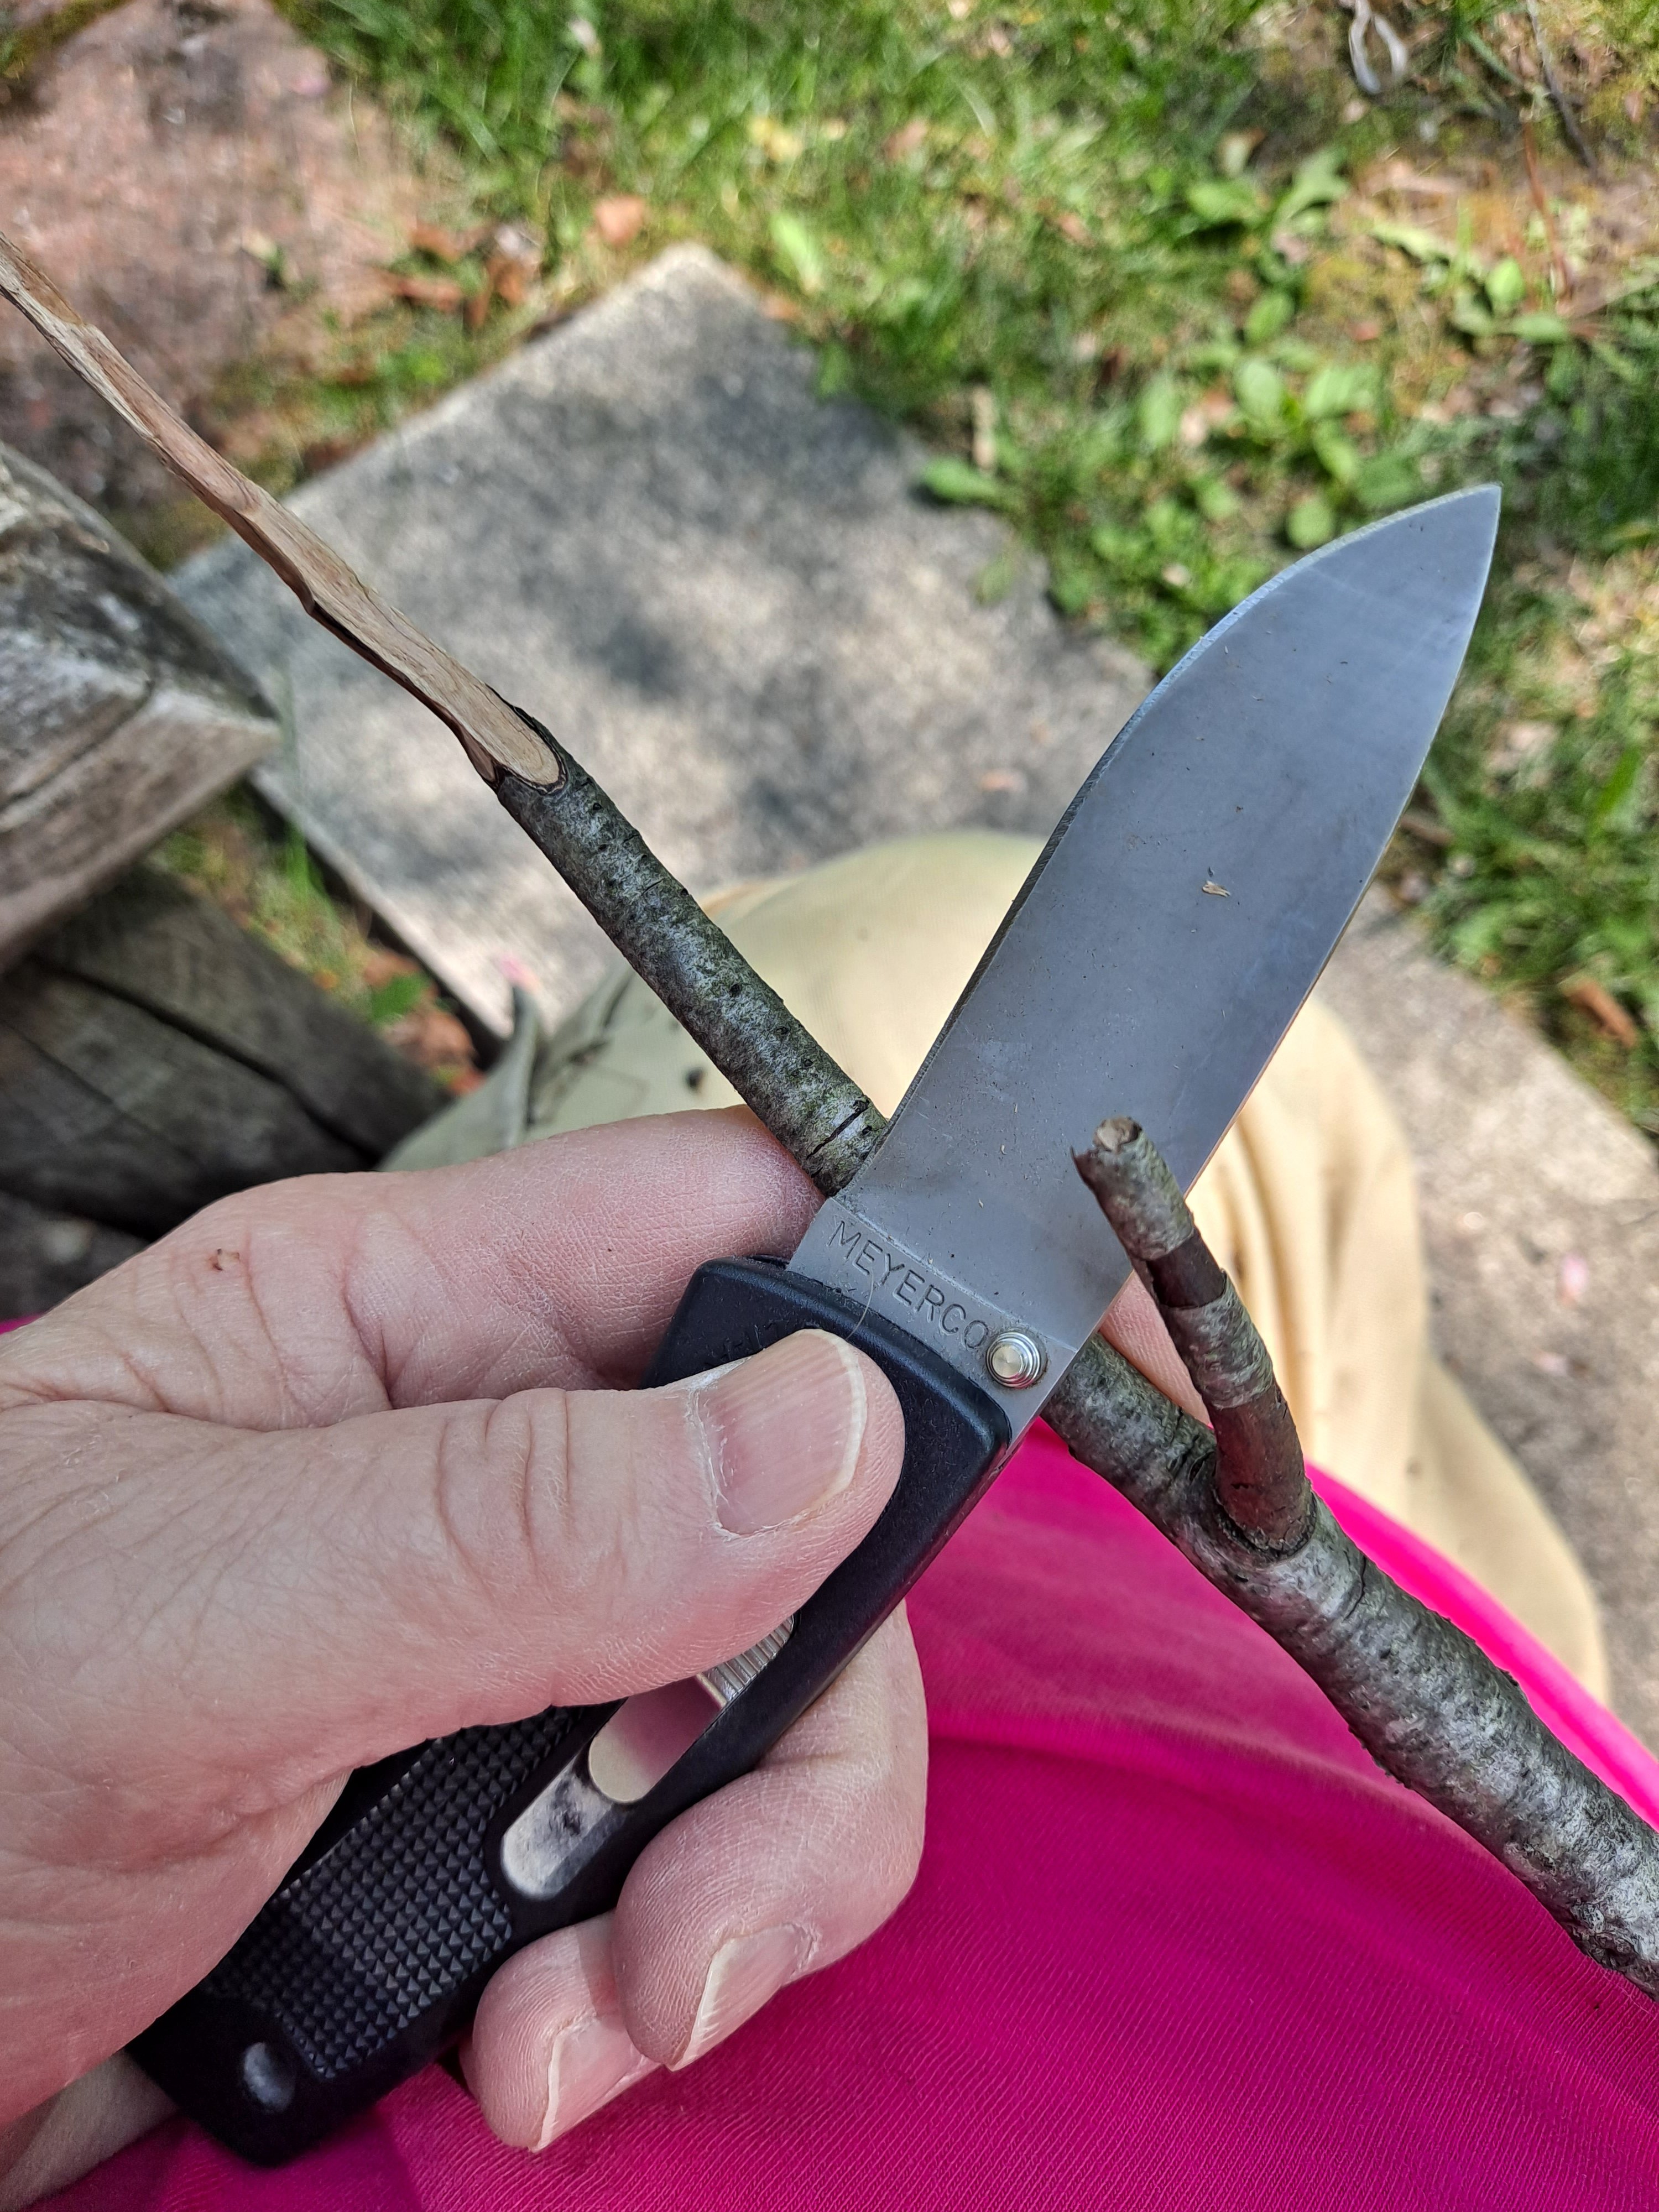 Holiday weekend with grandkids edc knife. | The Armory Life Forum